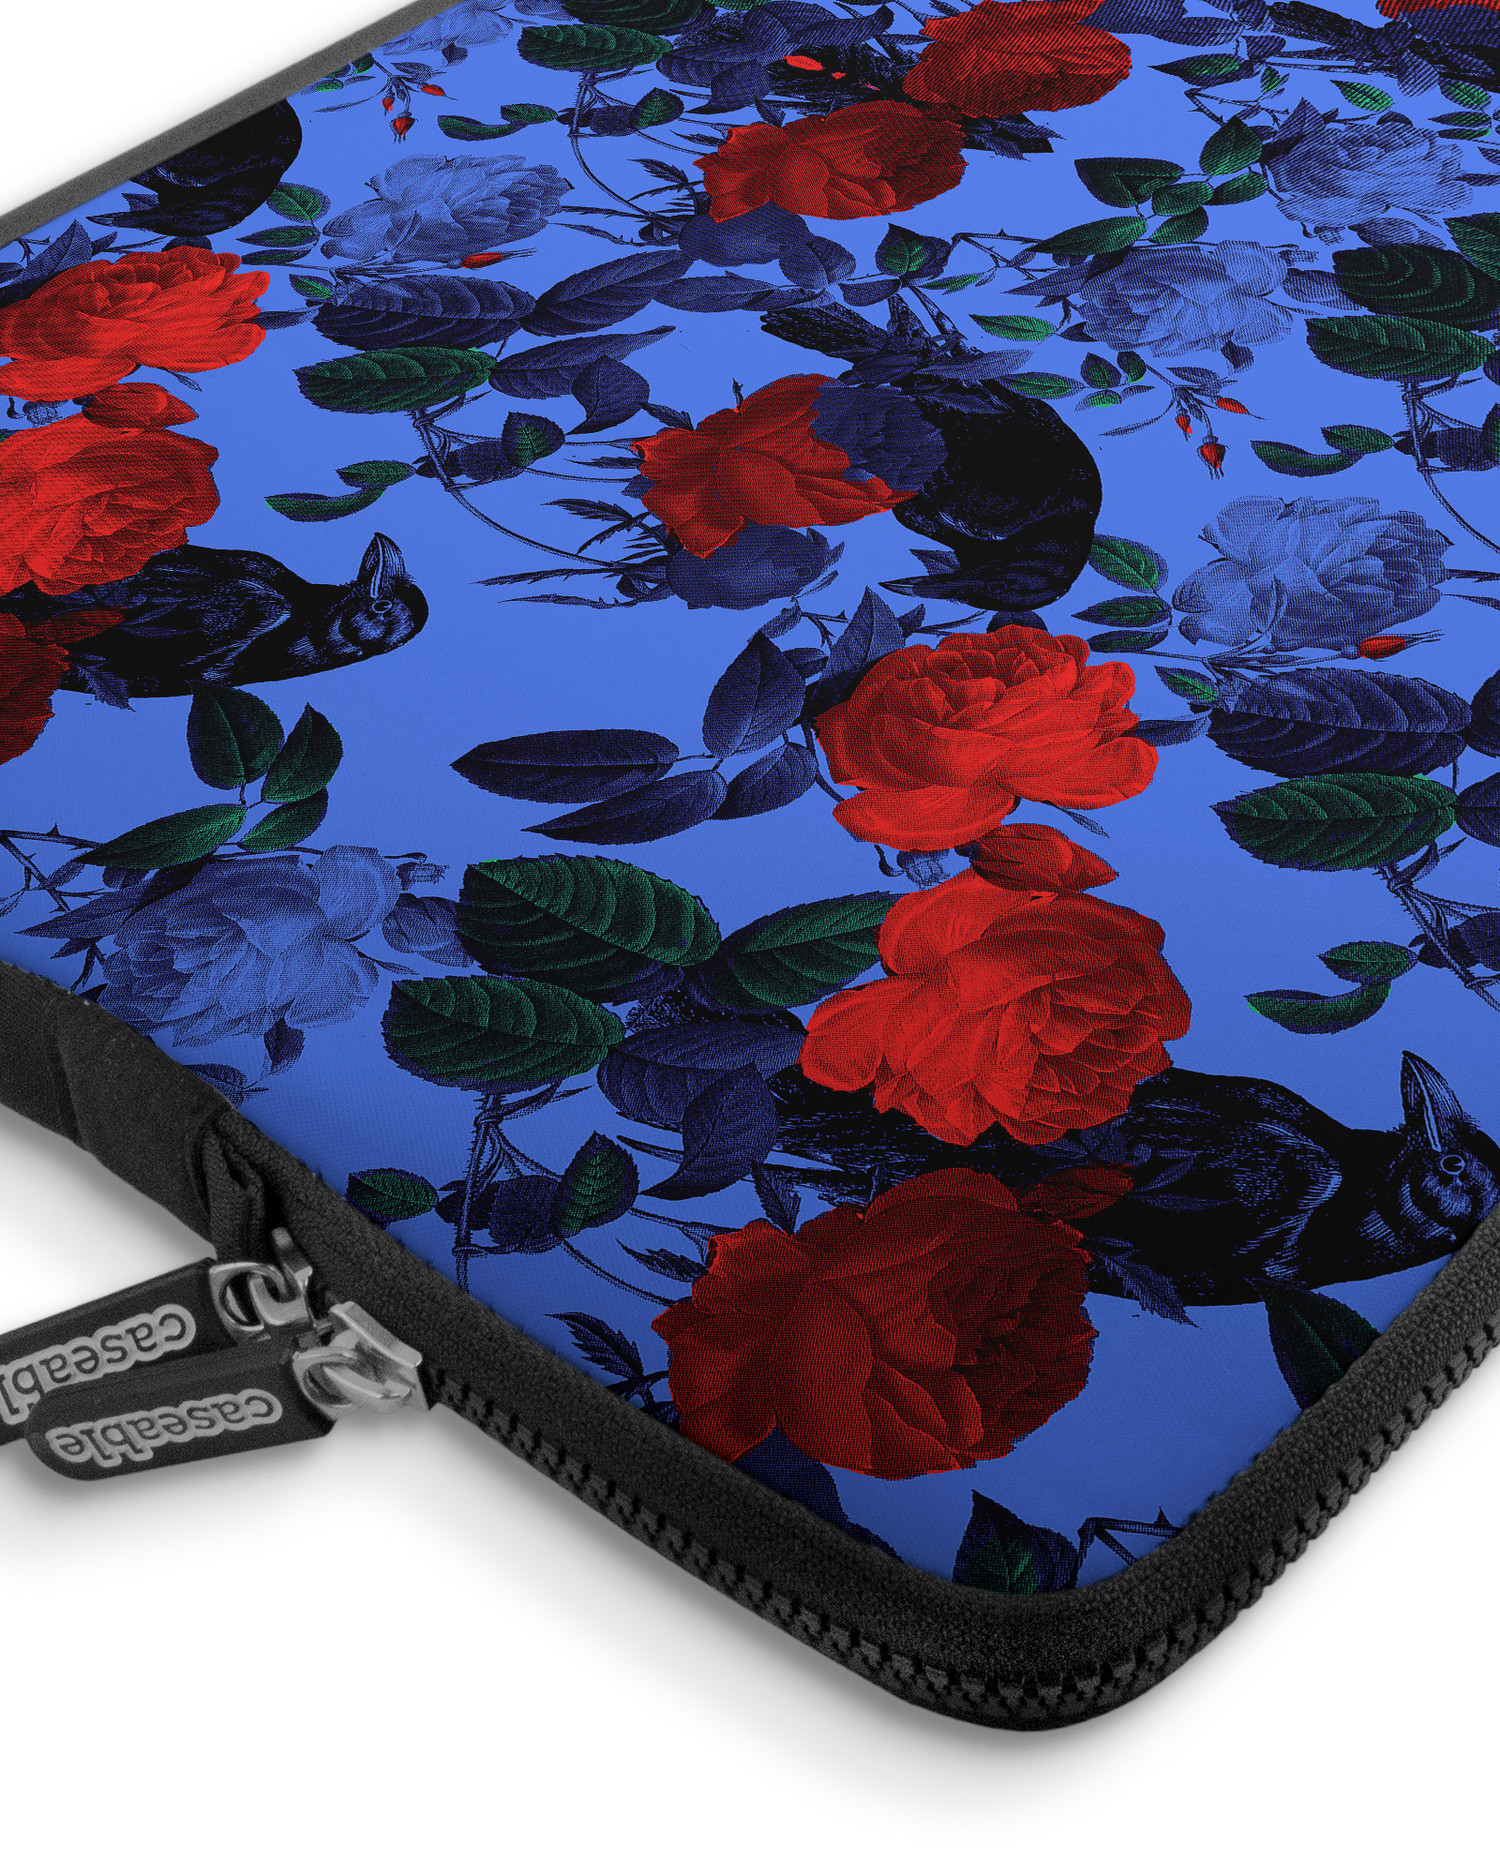 Roses And Ravens Premium Laptop Bag 17 inch with device inside